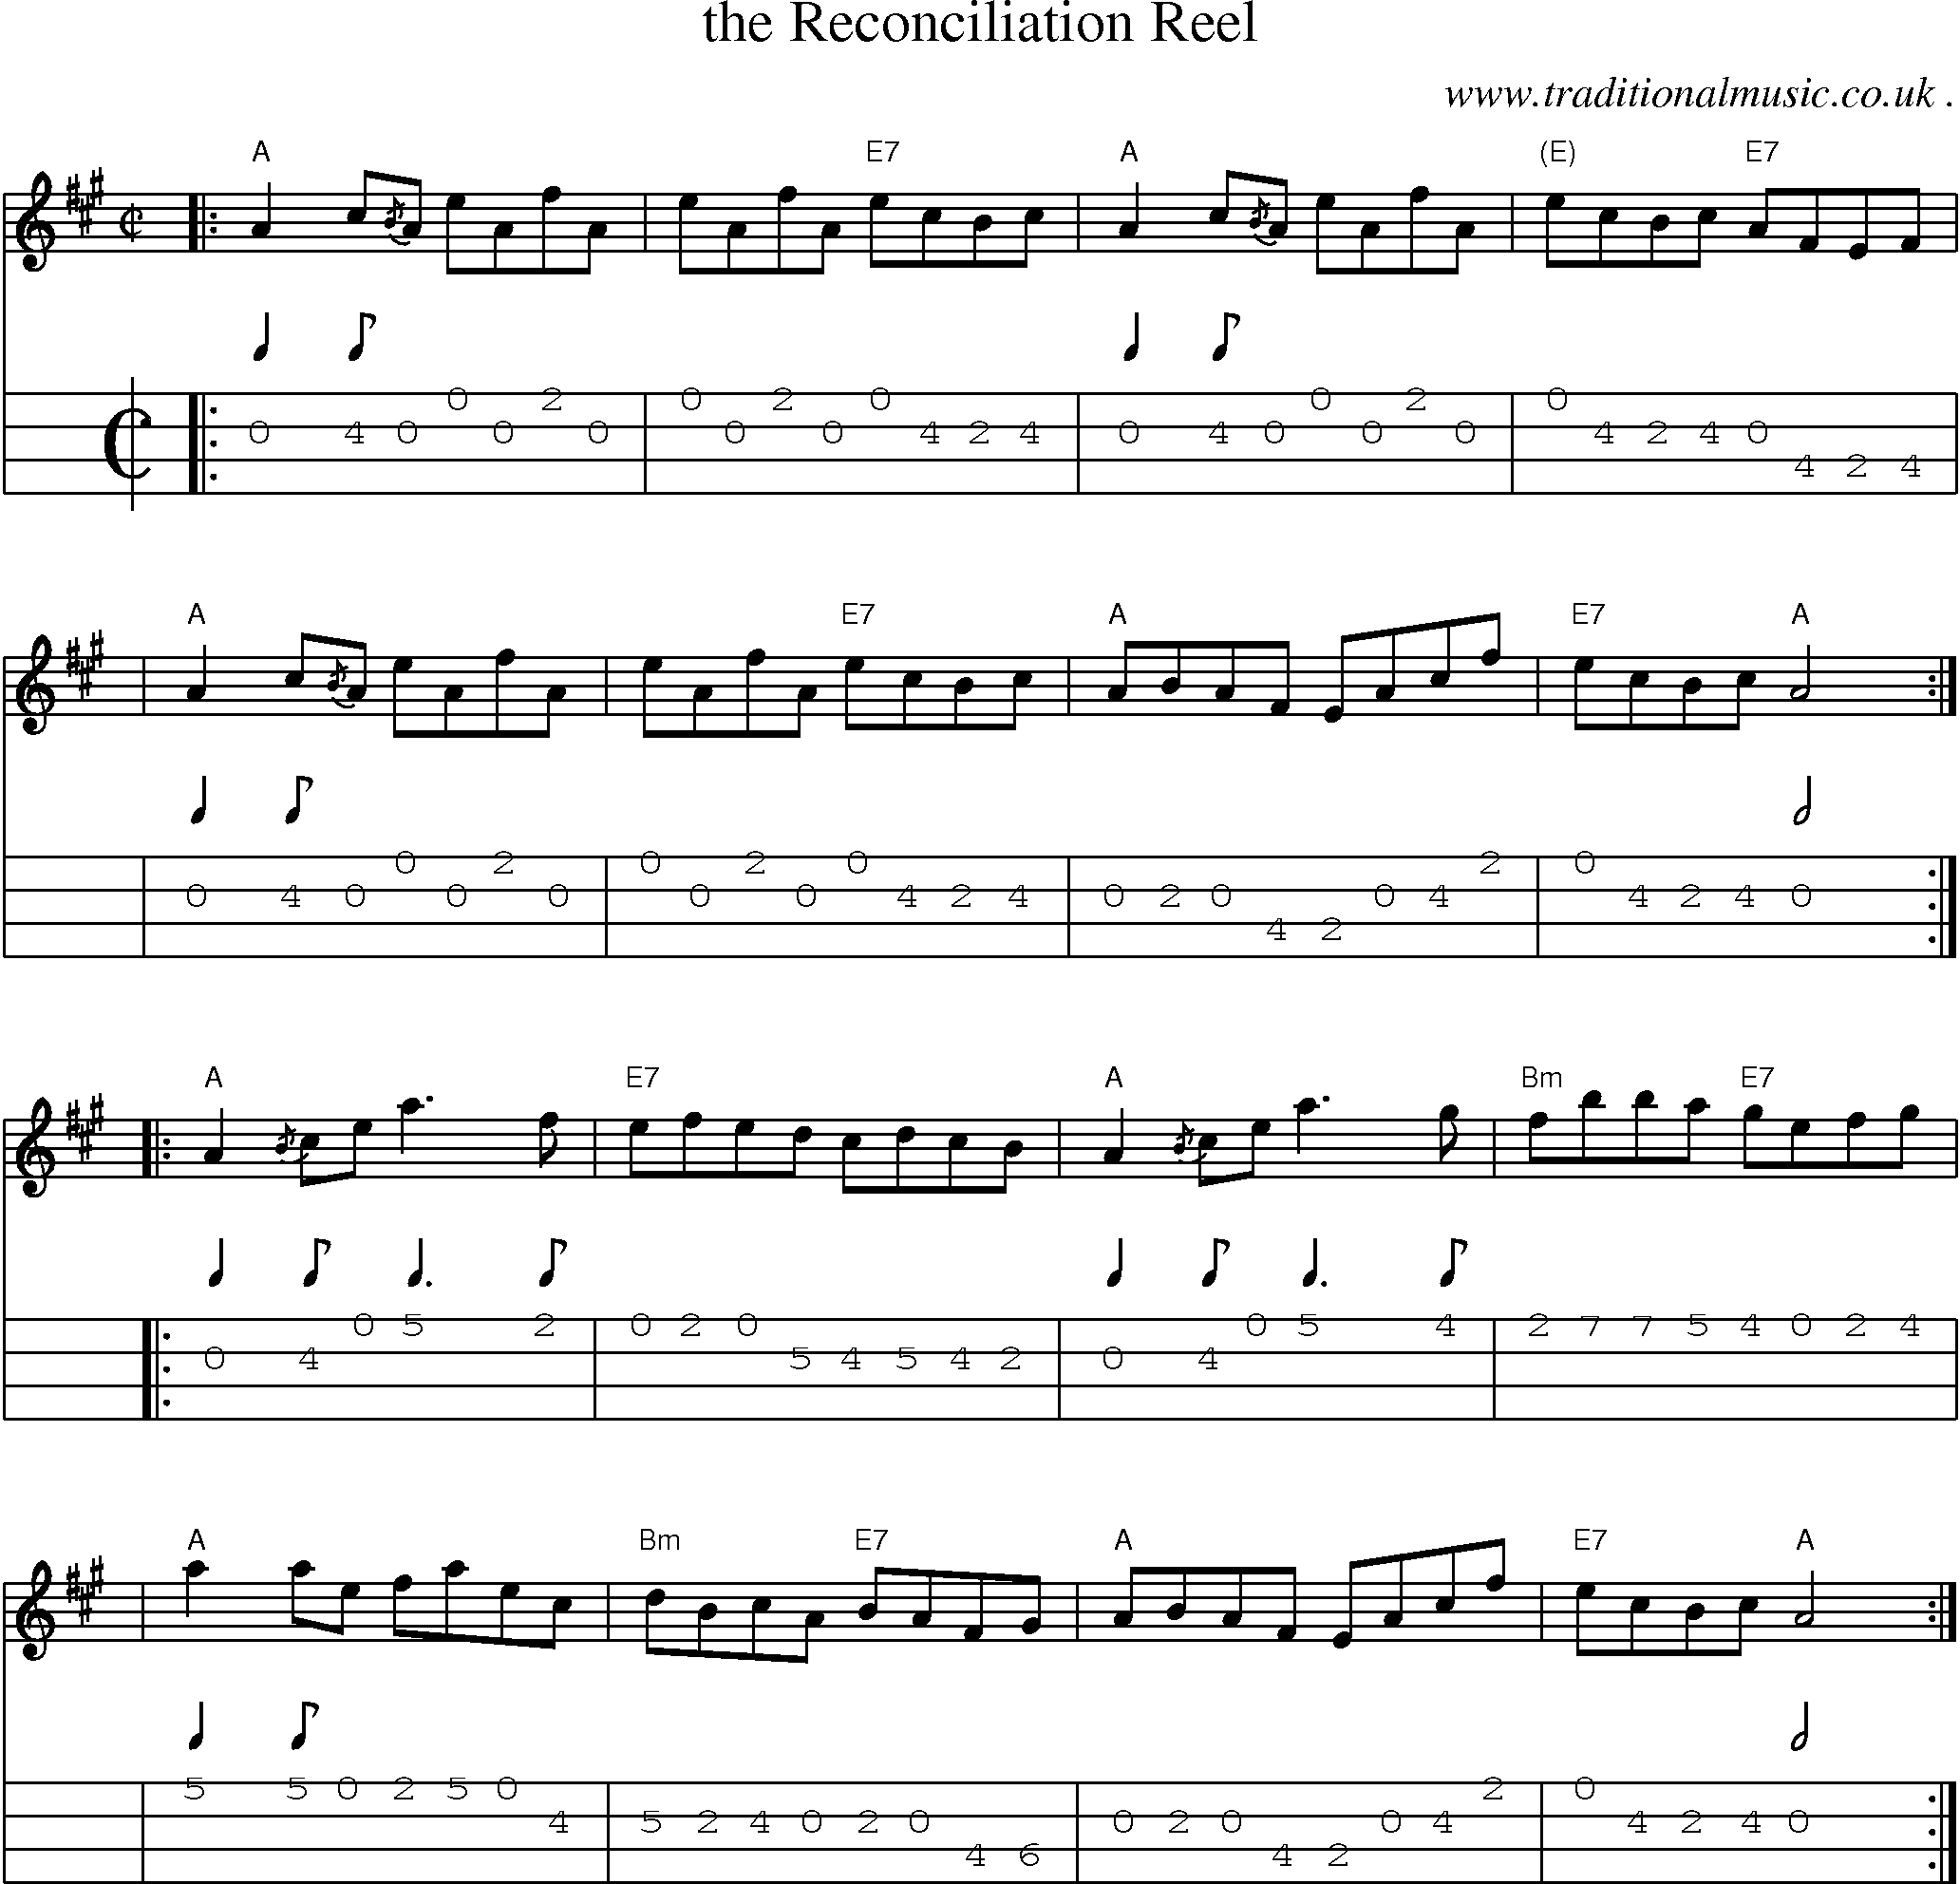 Sheet-music  score, Chords and Mandolin Tabs for The Reconciliation Reel